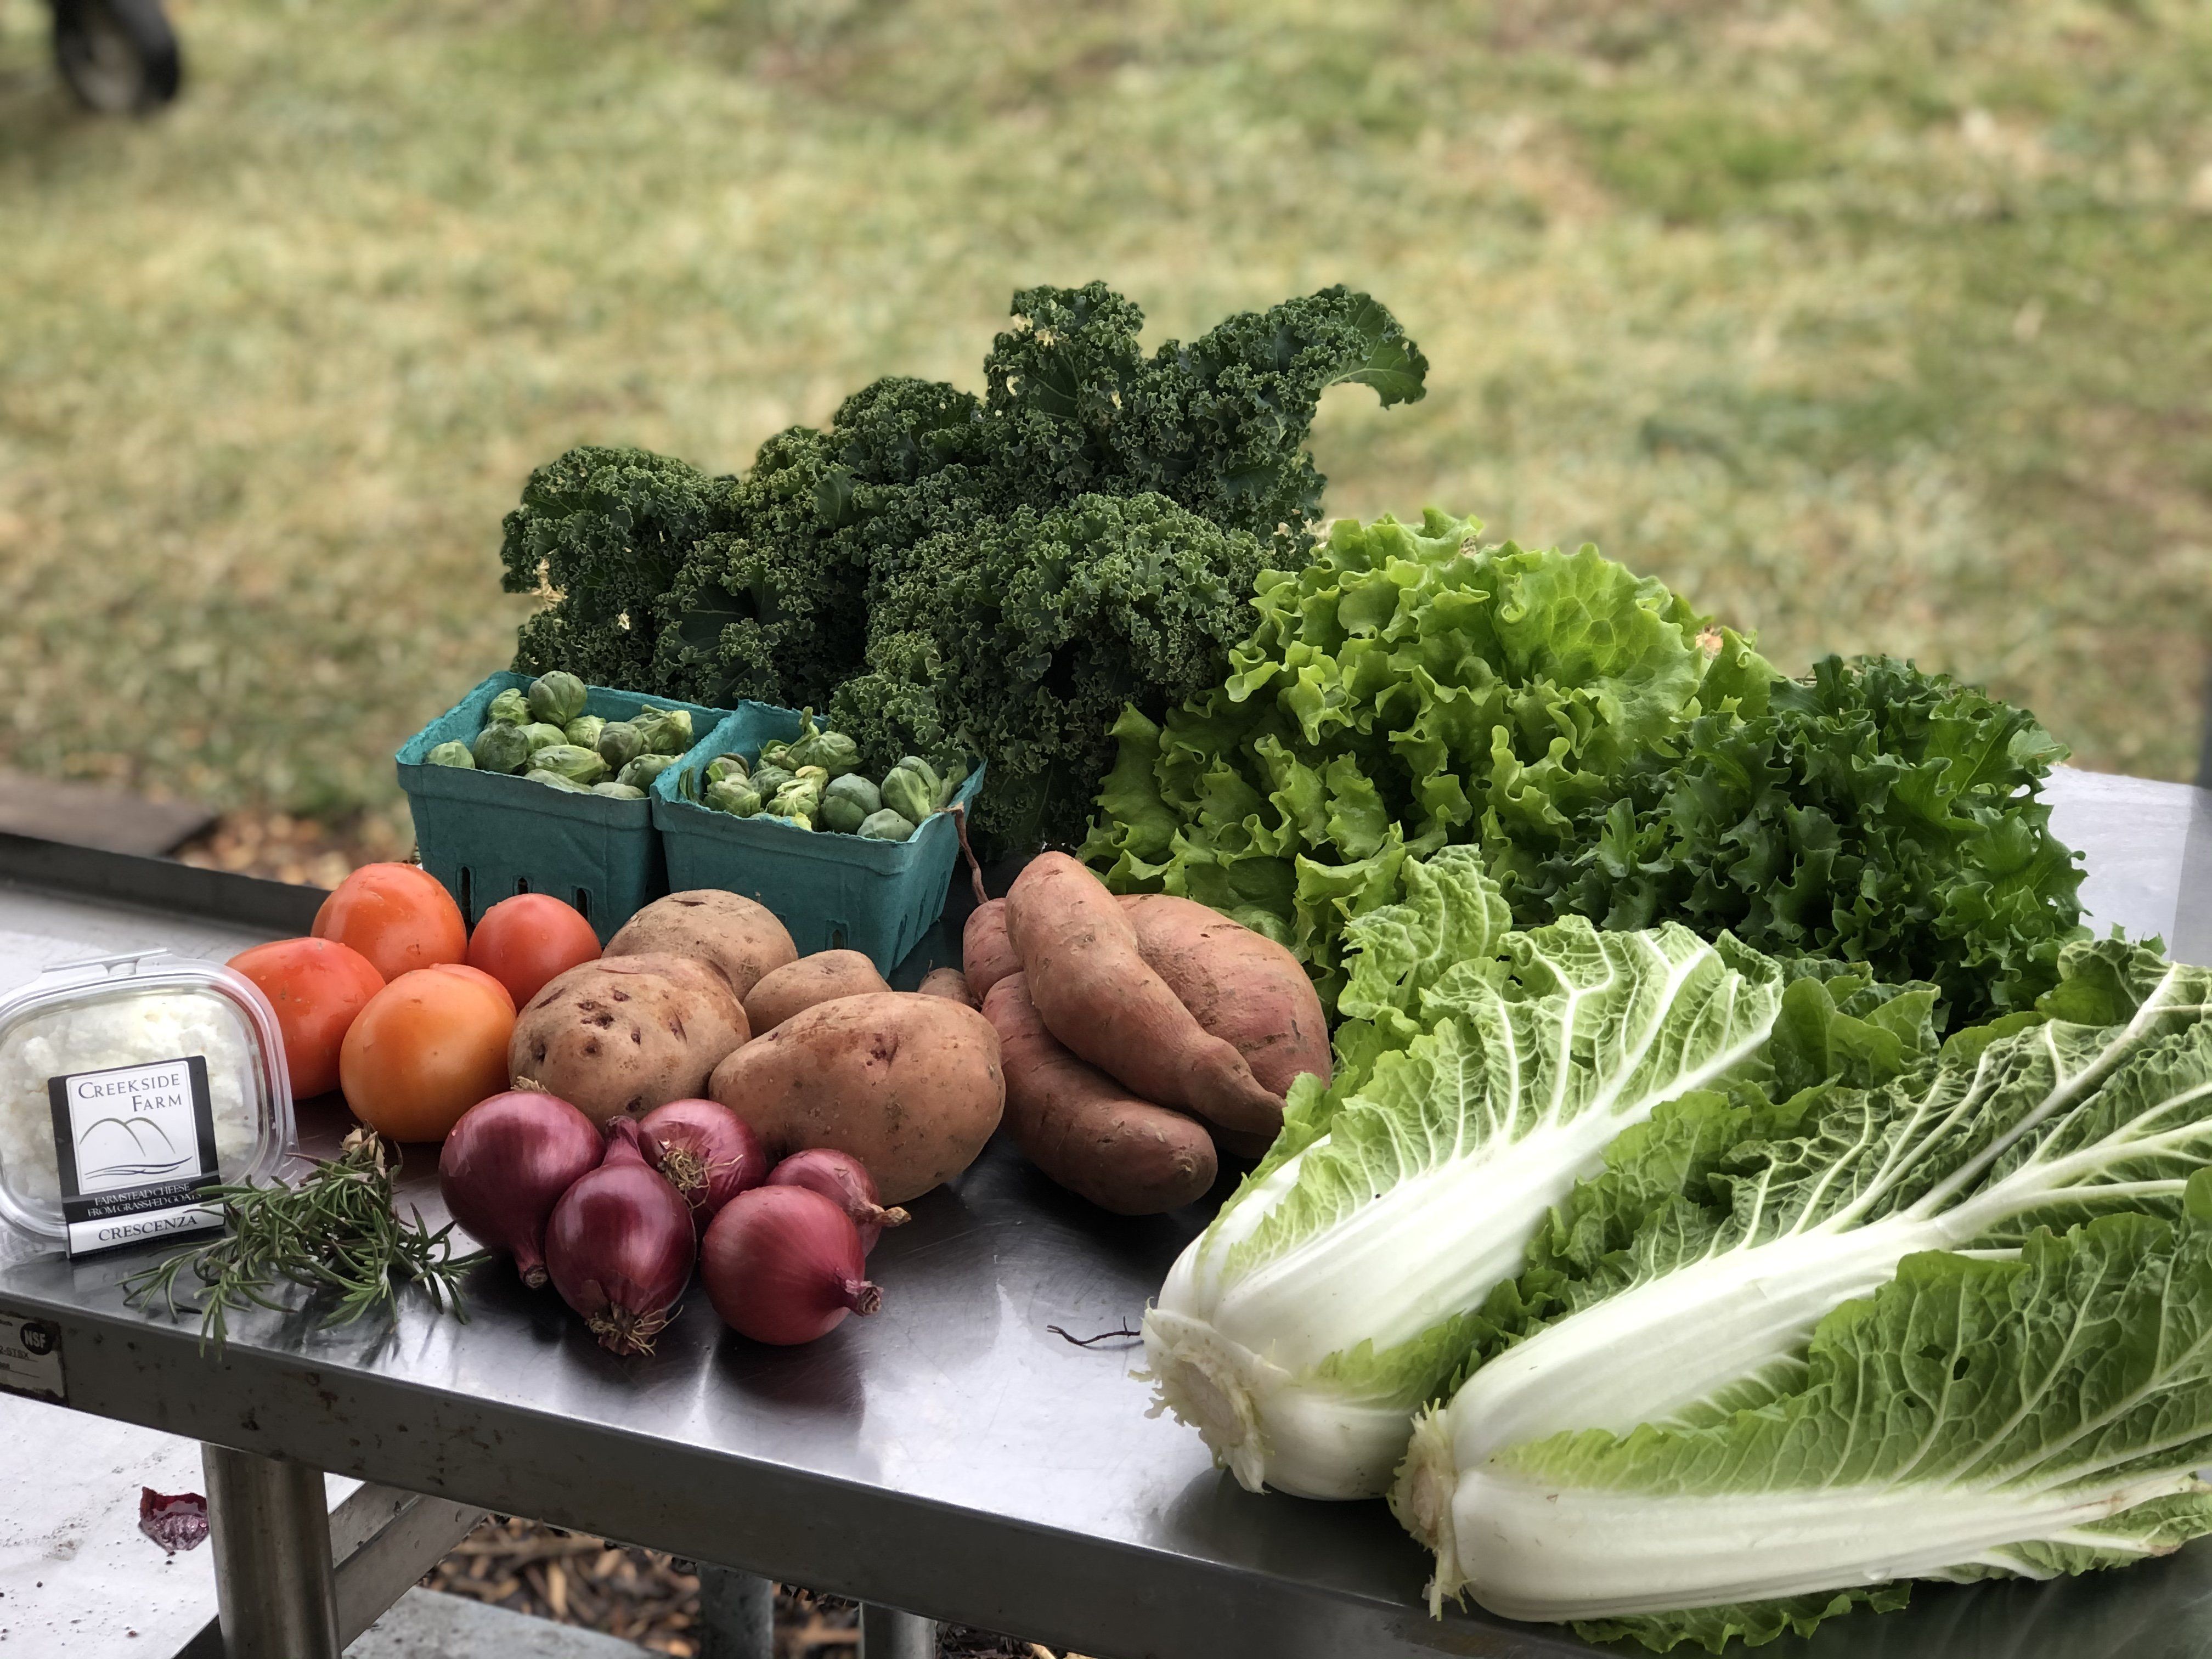 Previous Happening: Welcome to Fall CSA!